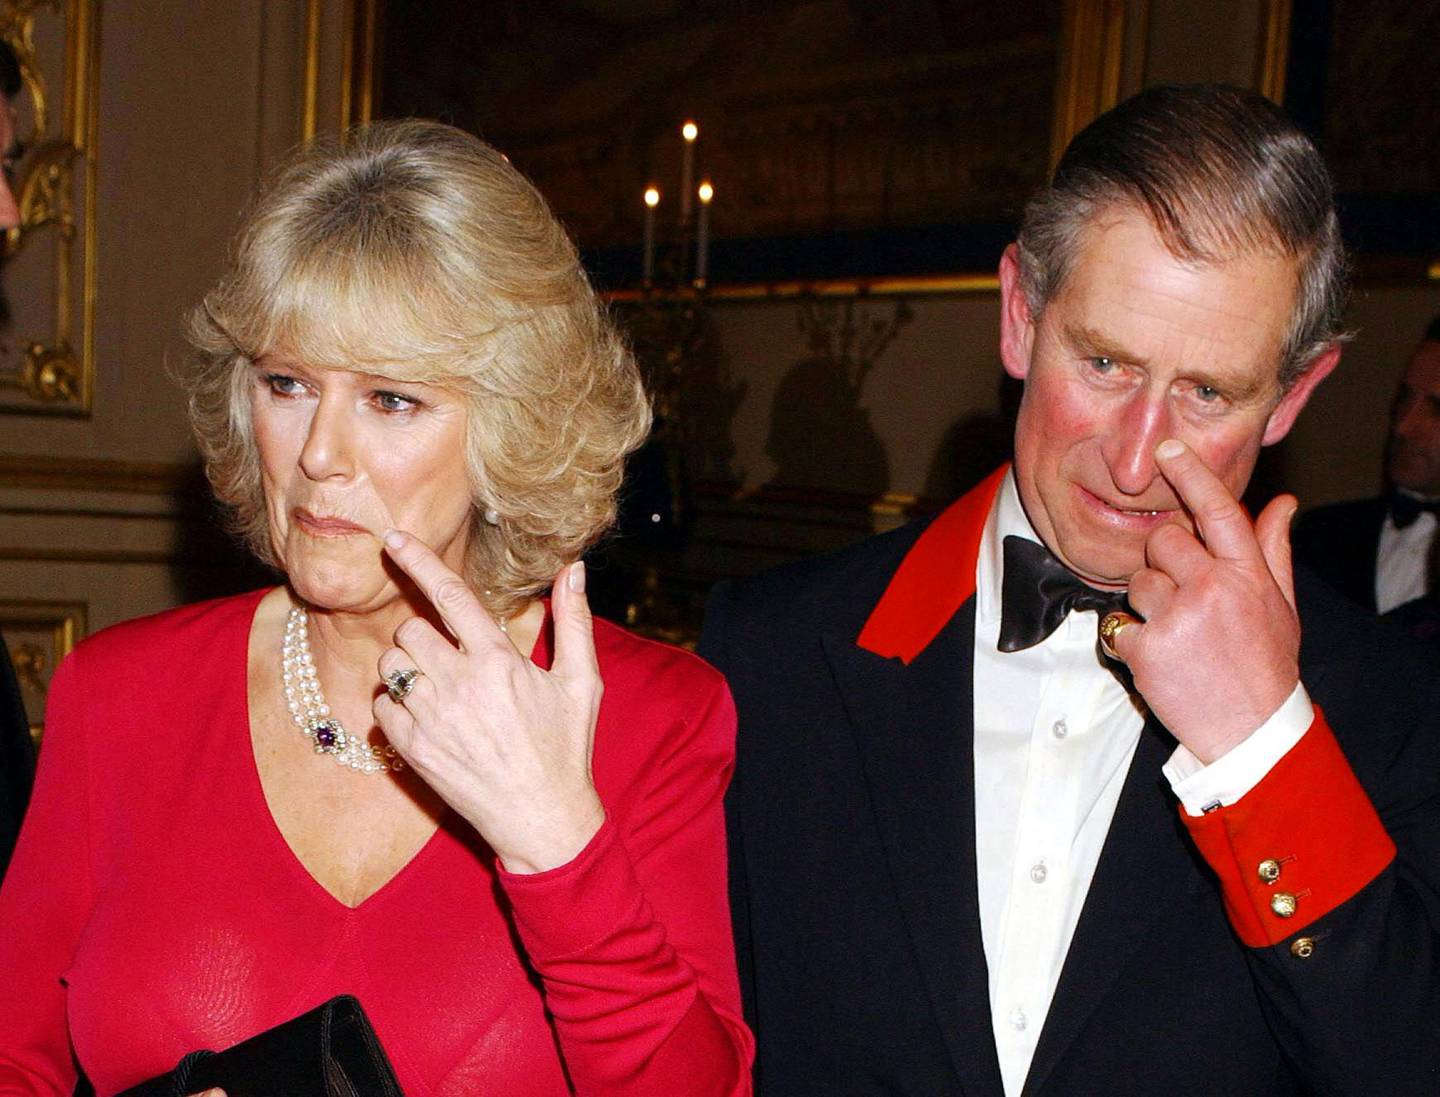 Prince Charles and Camilla Parker Bowles arrive for a party at Windsor Castle after announcing their engagement earlier 10 February, 2005.  Britain's Prince Charles and his longtime companion Camilla Parker Bowles are to marry, his office announced Thursday, putting the official seal on a relationship that first blossomed 35 years ago.     AFP PHOTO/JOHN STILLWELL/WPA POOL